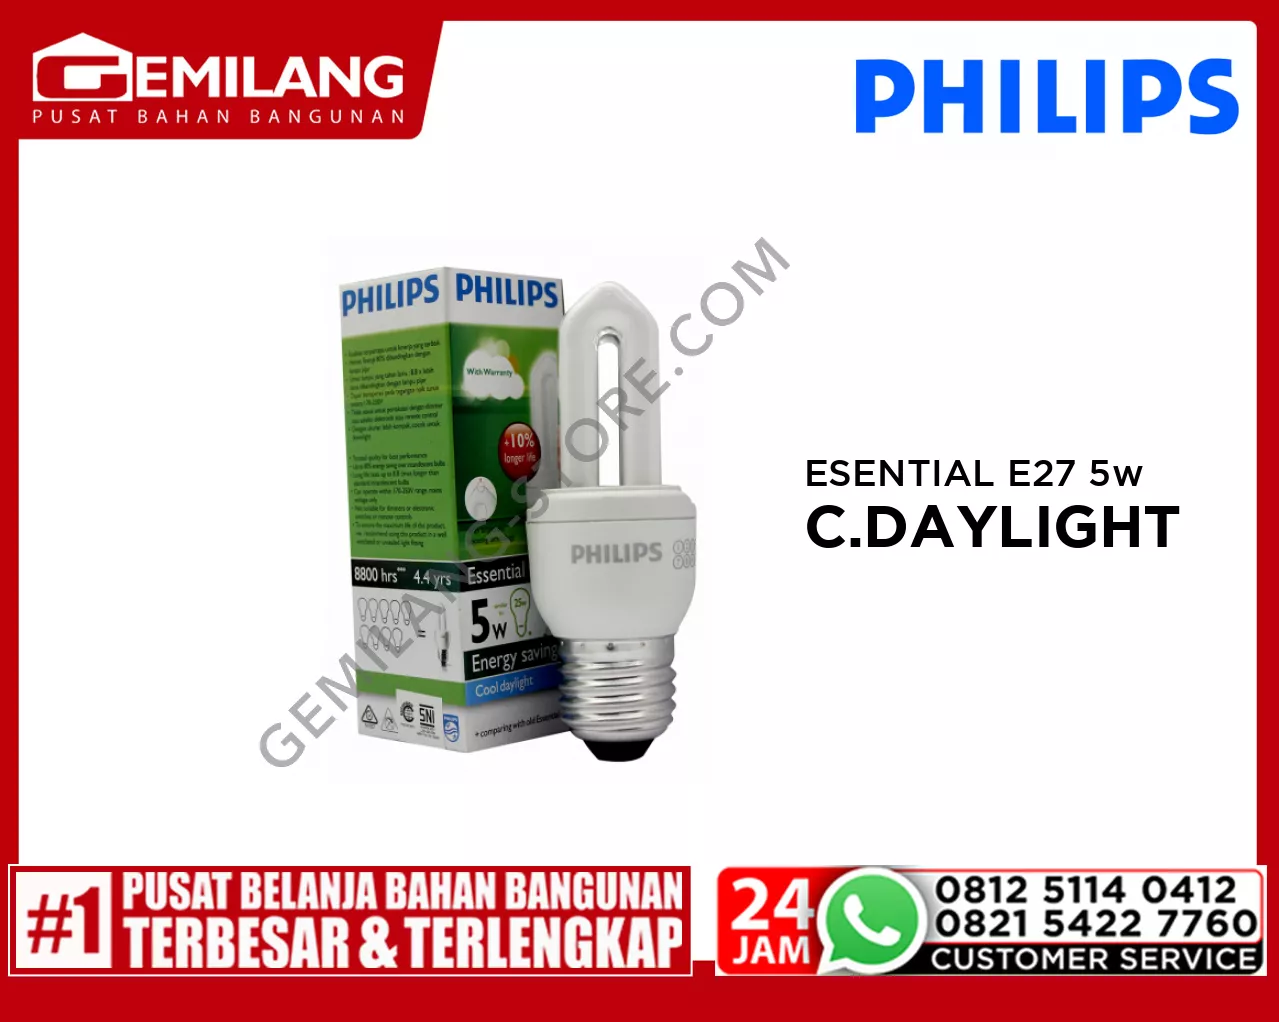 PHILIPS ESSENTIAL E27 COOL DAYLIGHT 5w